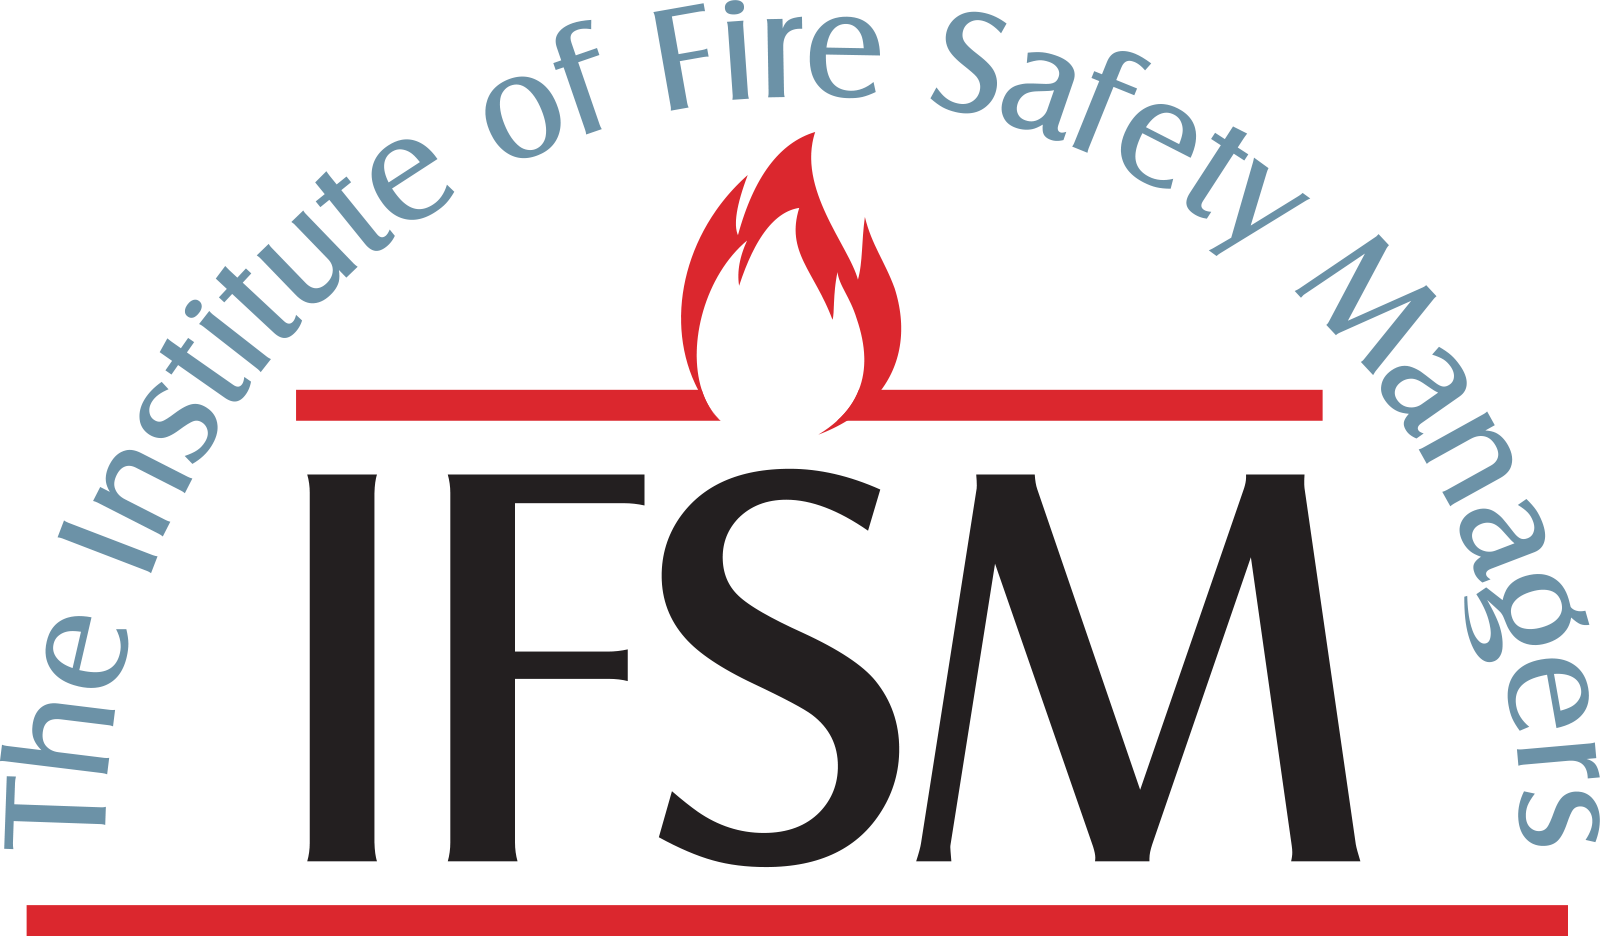 The Institute of Fire Safety Managers